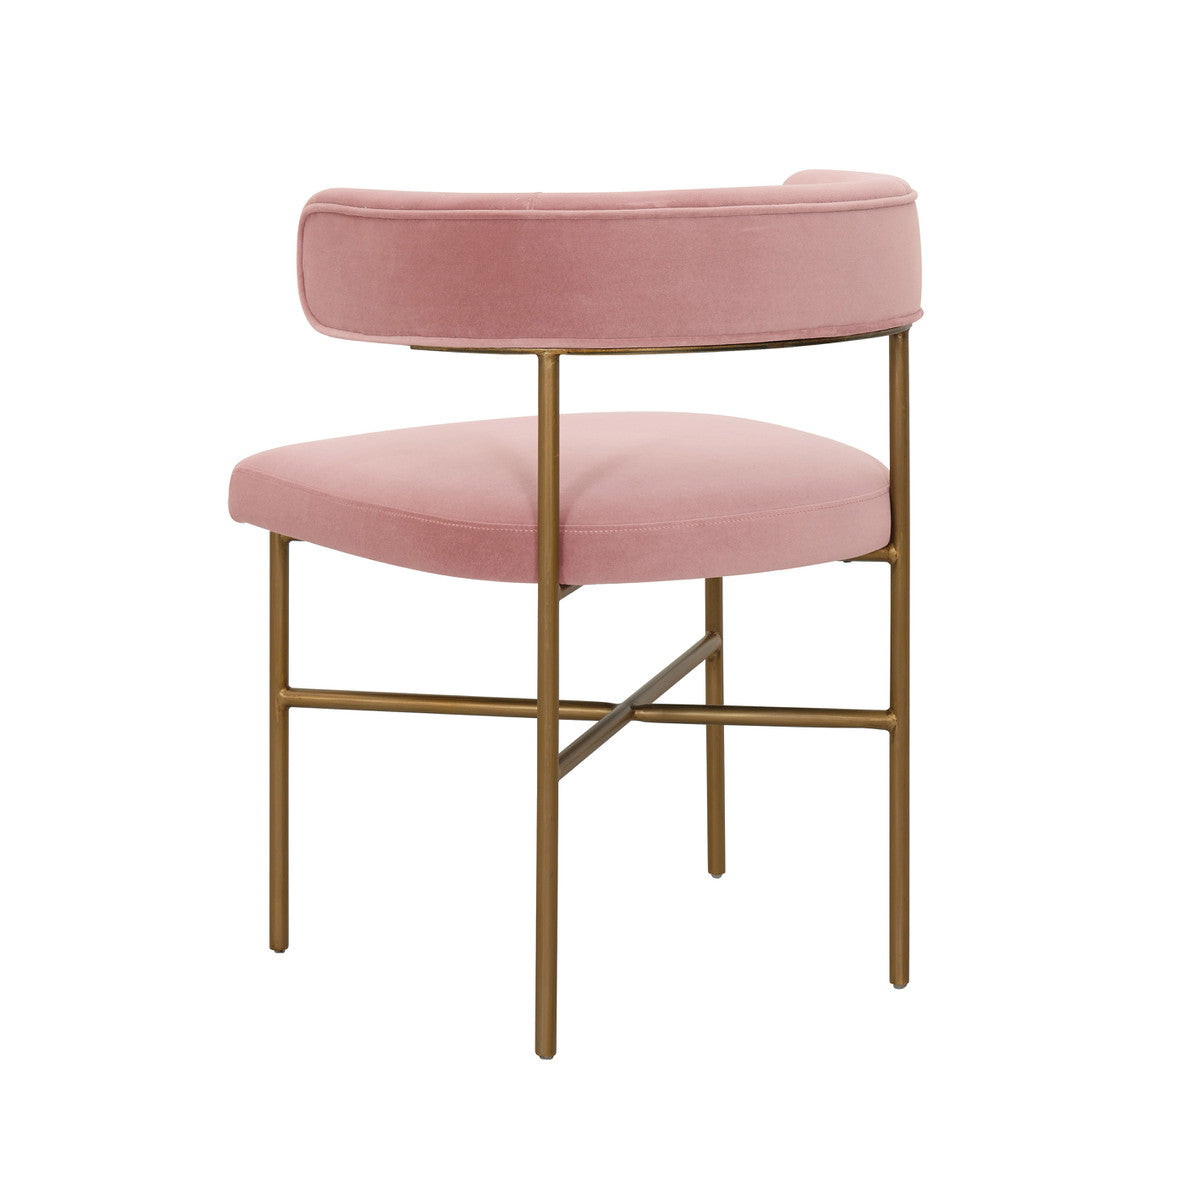 Kim Performance Blush Velvet With Gold Frame Chair - Luxury Living Collection